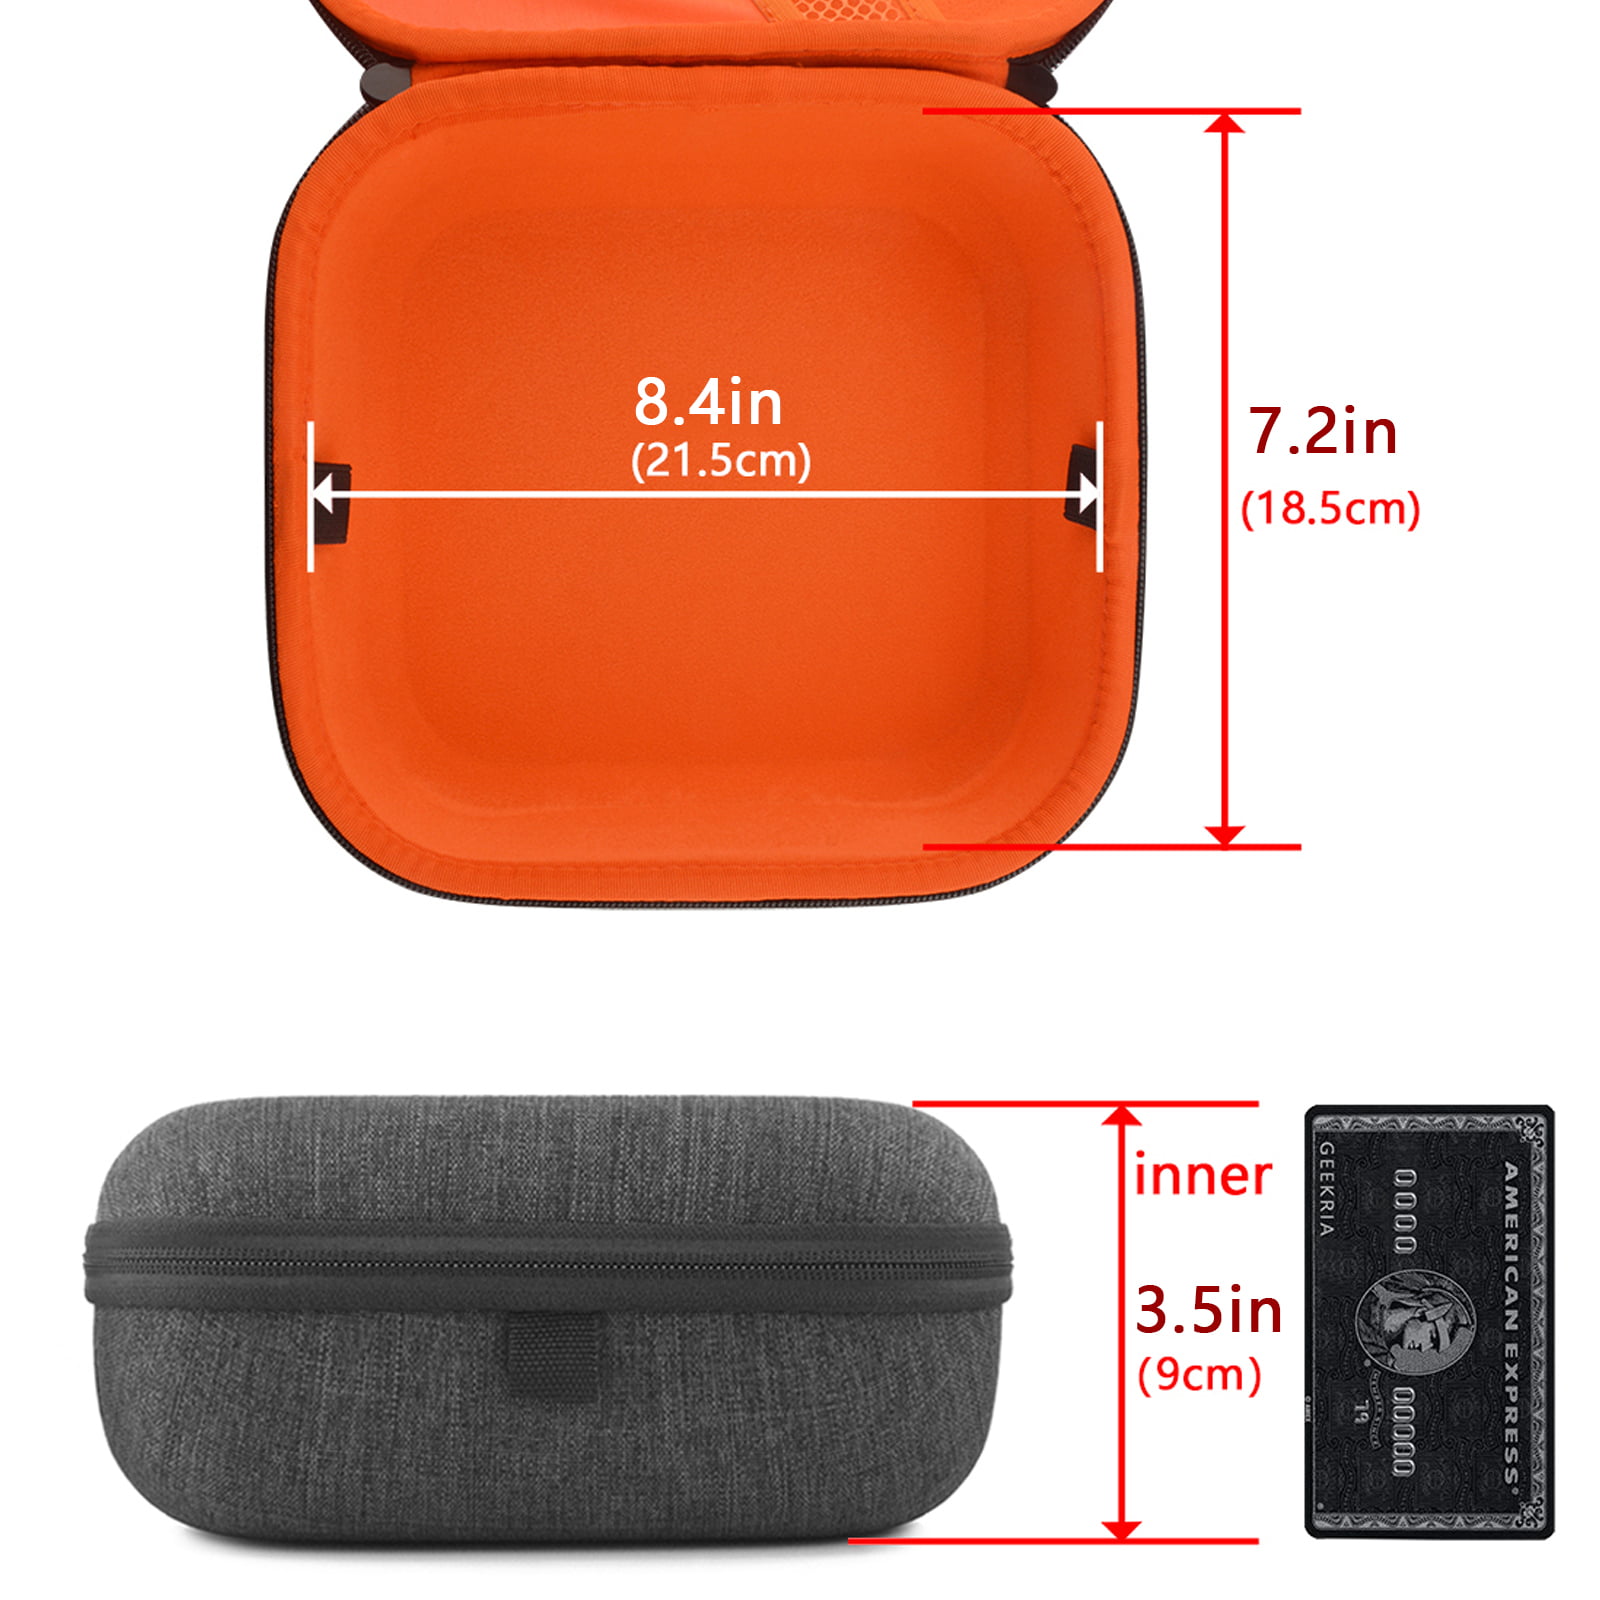 Geekria Hard Shell Headphone Case for Skullcandy and more